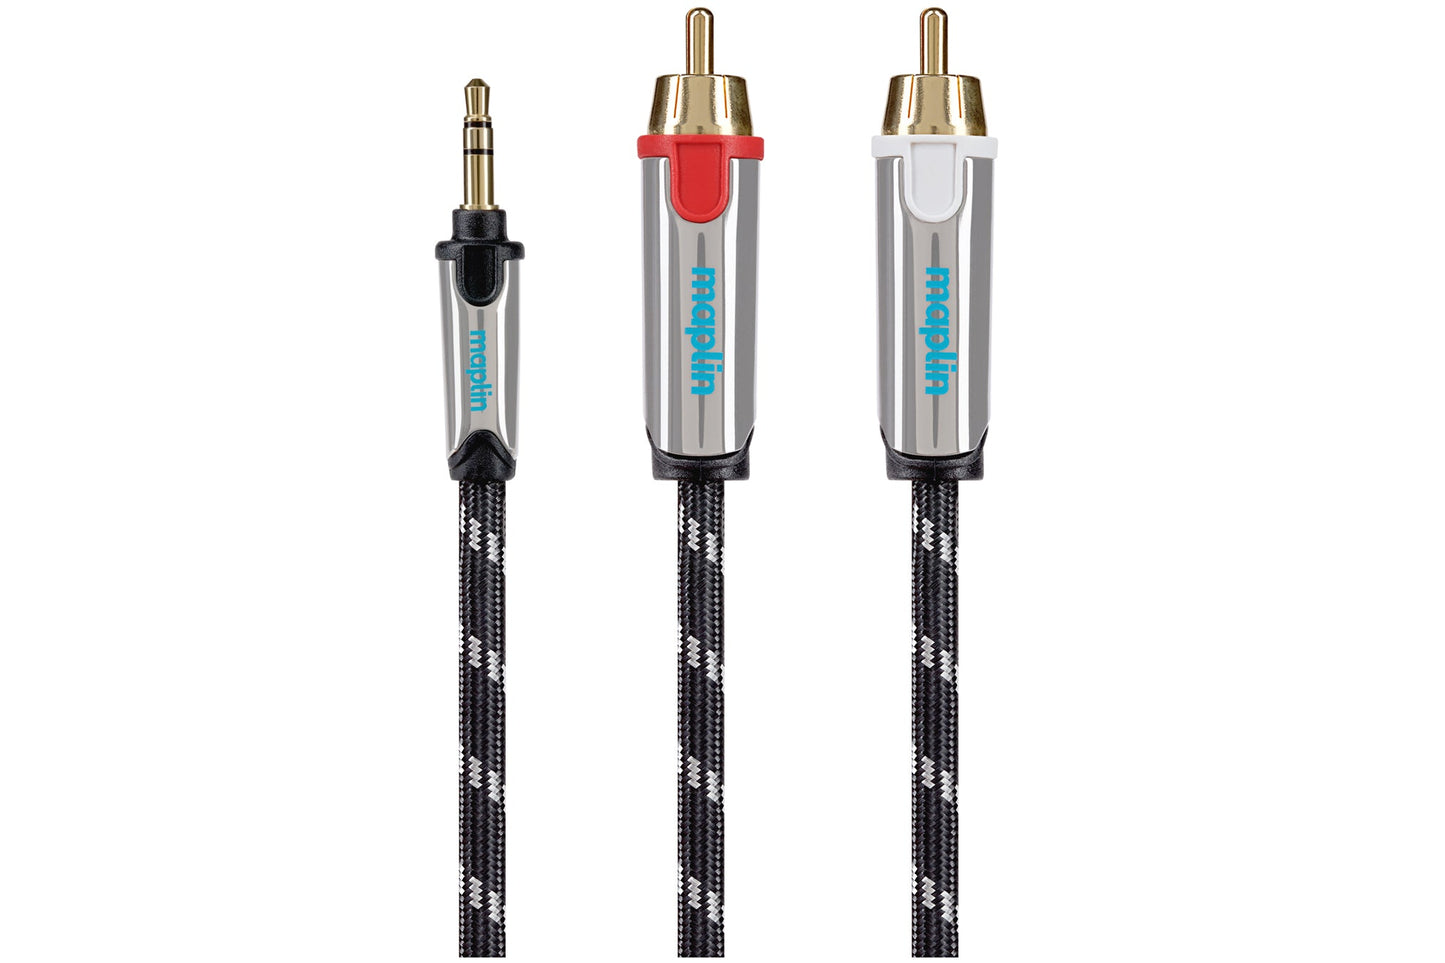 Maplin Pro 3.5mm Aux Stereo 3-Pole Jack Plug to Twin RCA Phono Braided Cable - Black, 5m - maplin.co.uk